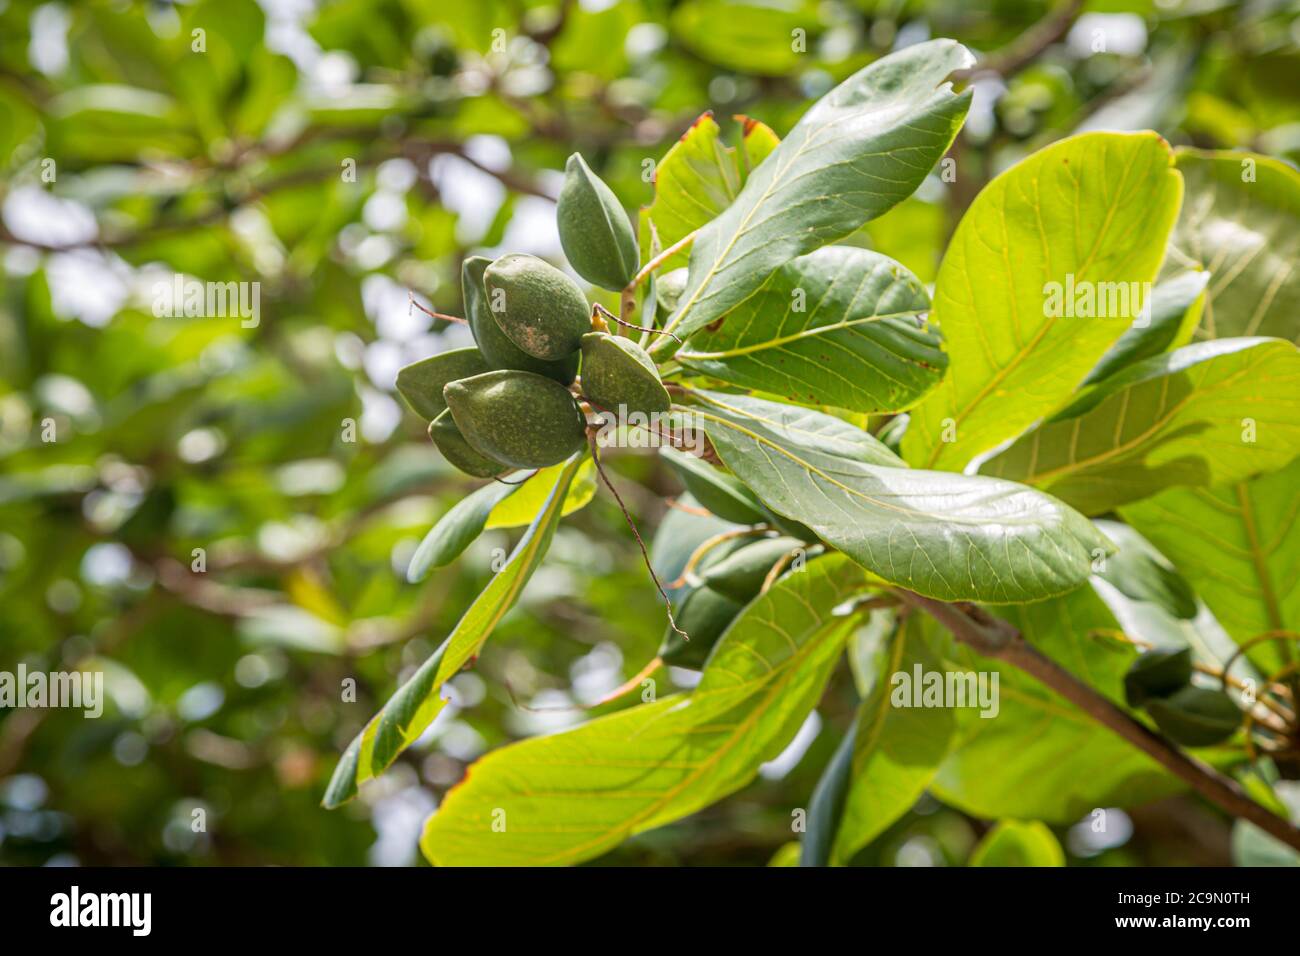 A Tropical Almond Tree on the Island of Barbados, with a Shallow Depth of Field Stock Photo